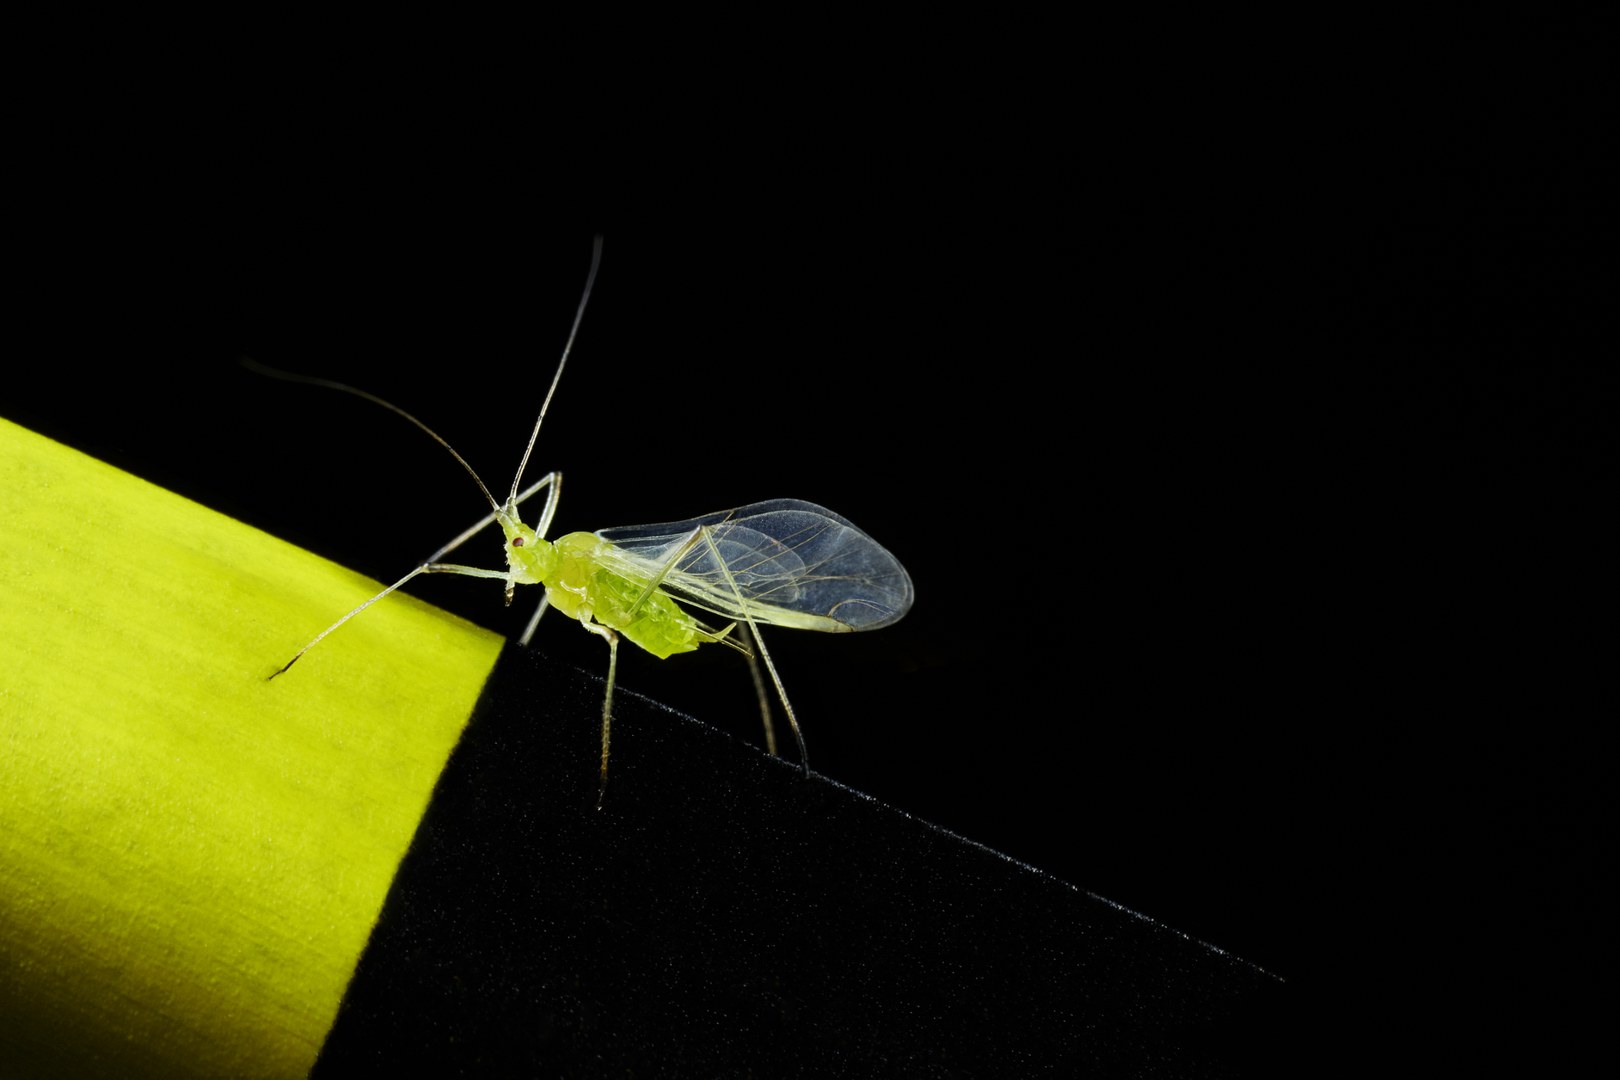 An aphid has landed on her favorite color, a bright yellow.